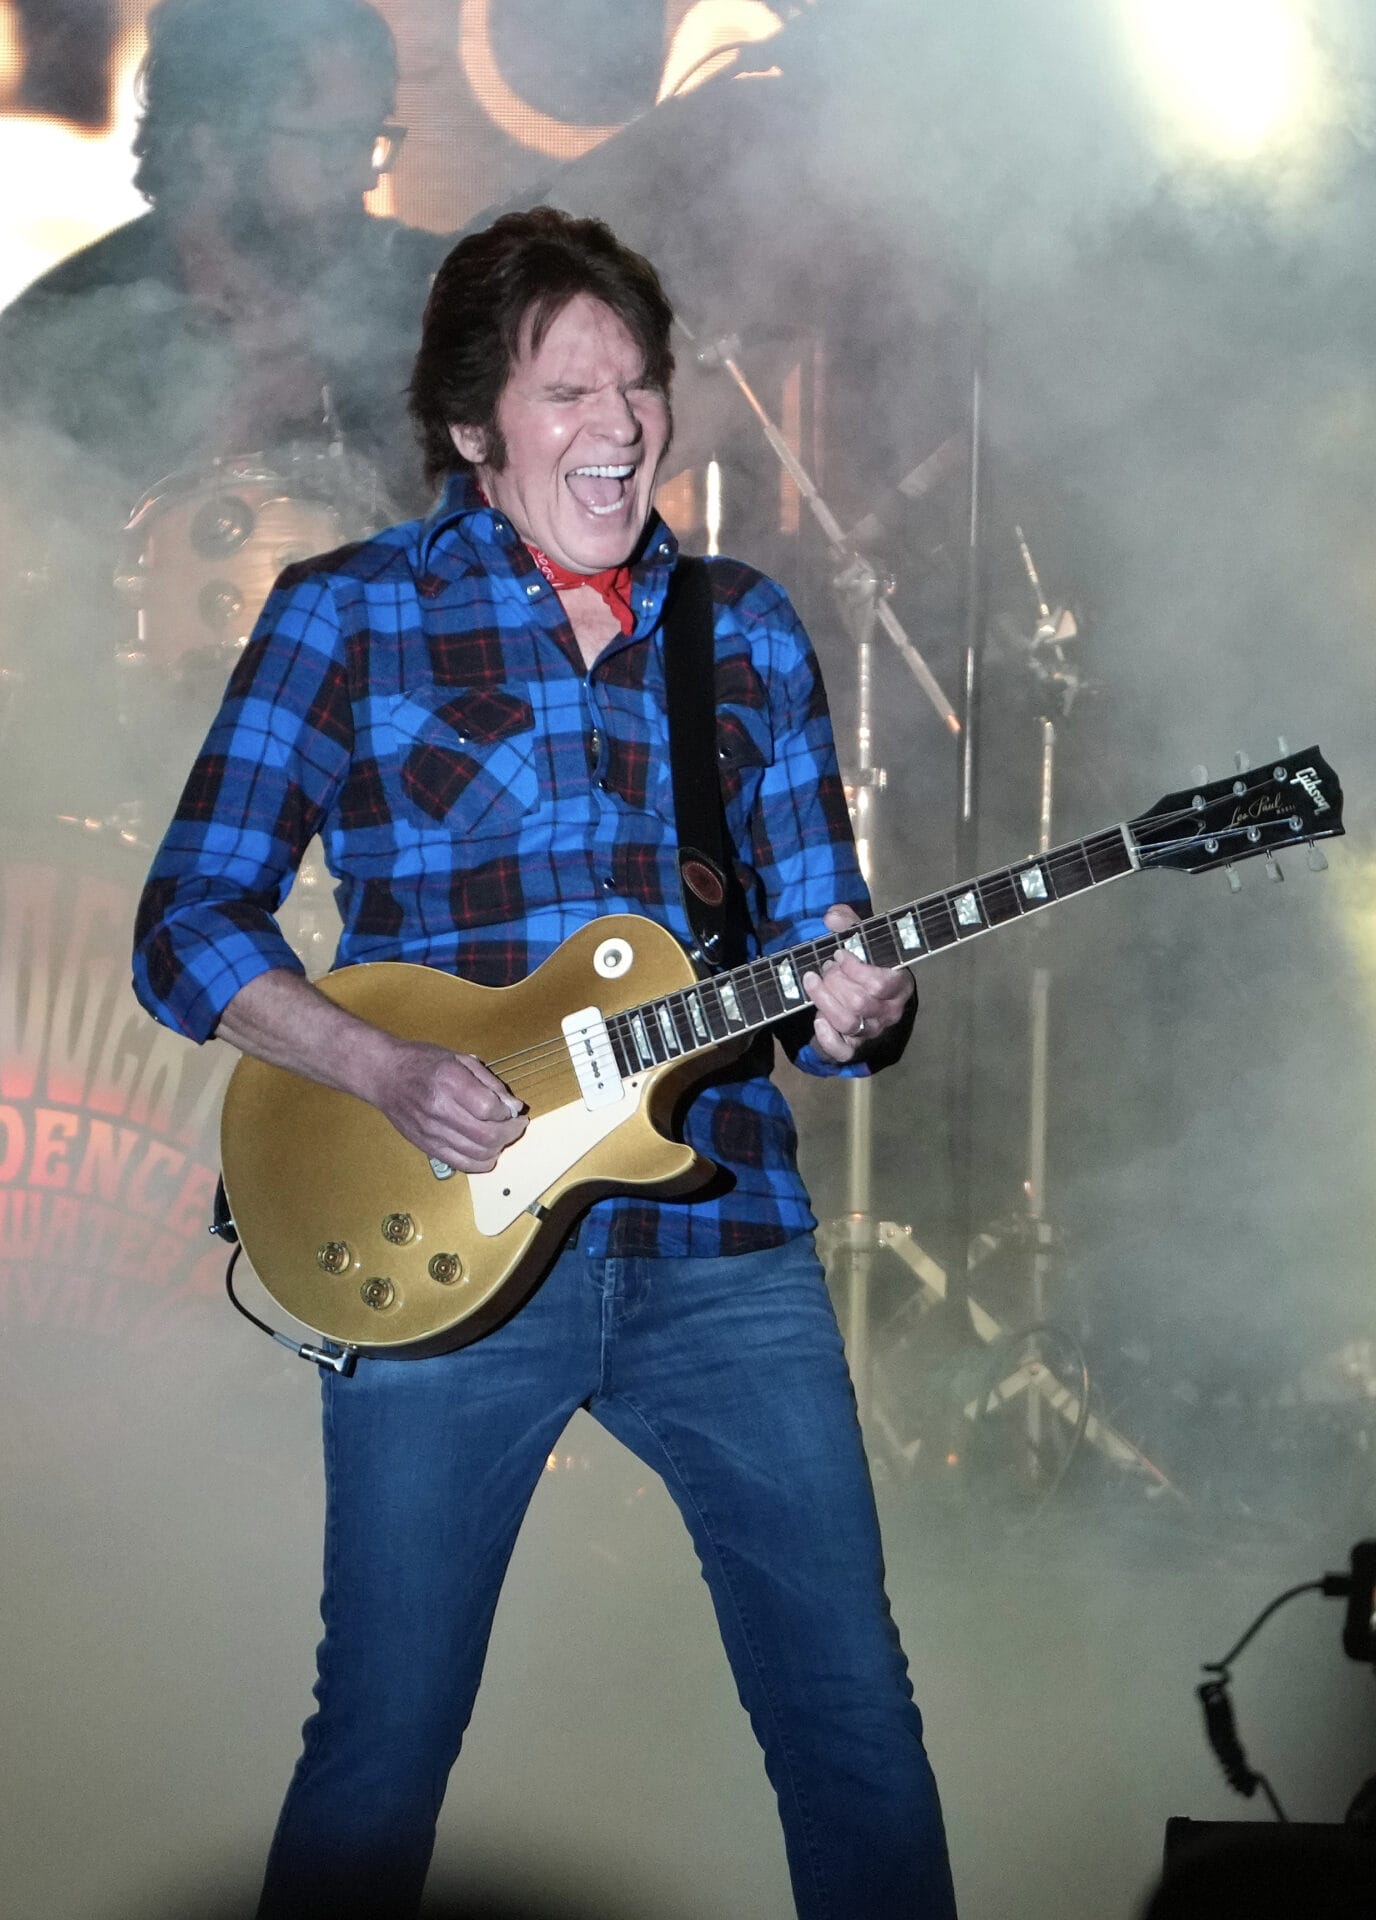 John Fogerty Extends Celebration Tour with Special Guests George Thorogood & the Destroyers, Hearty Har